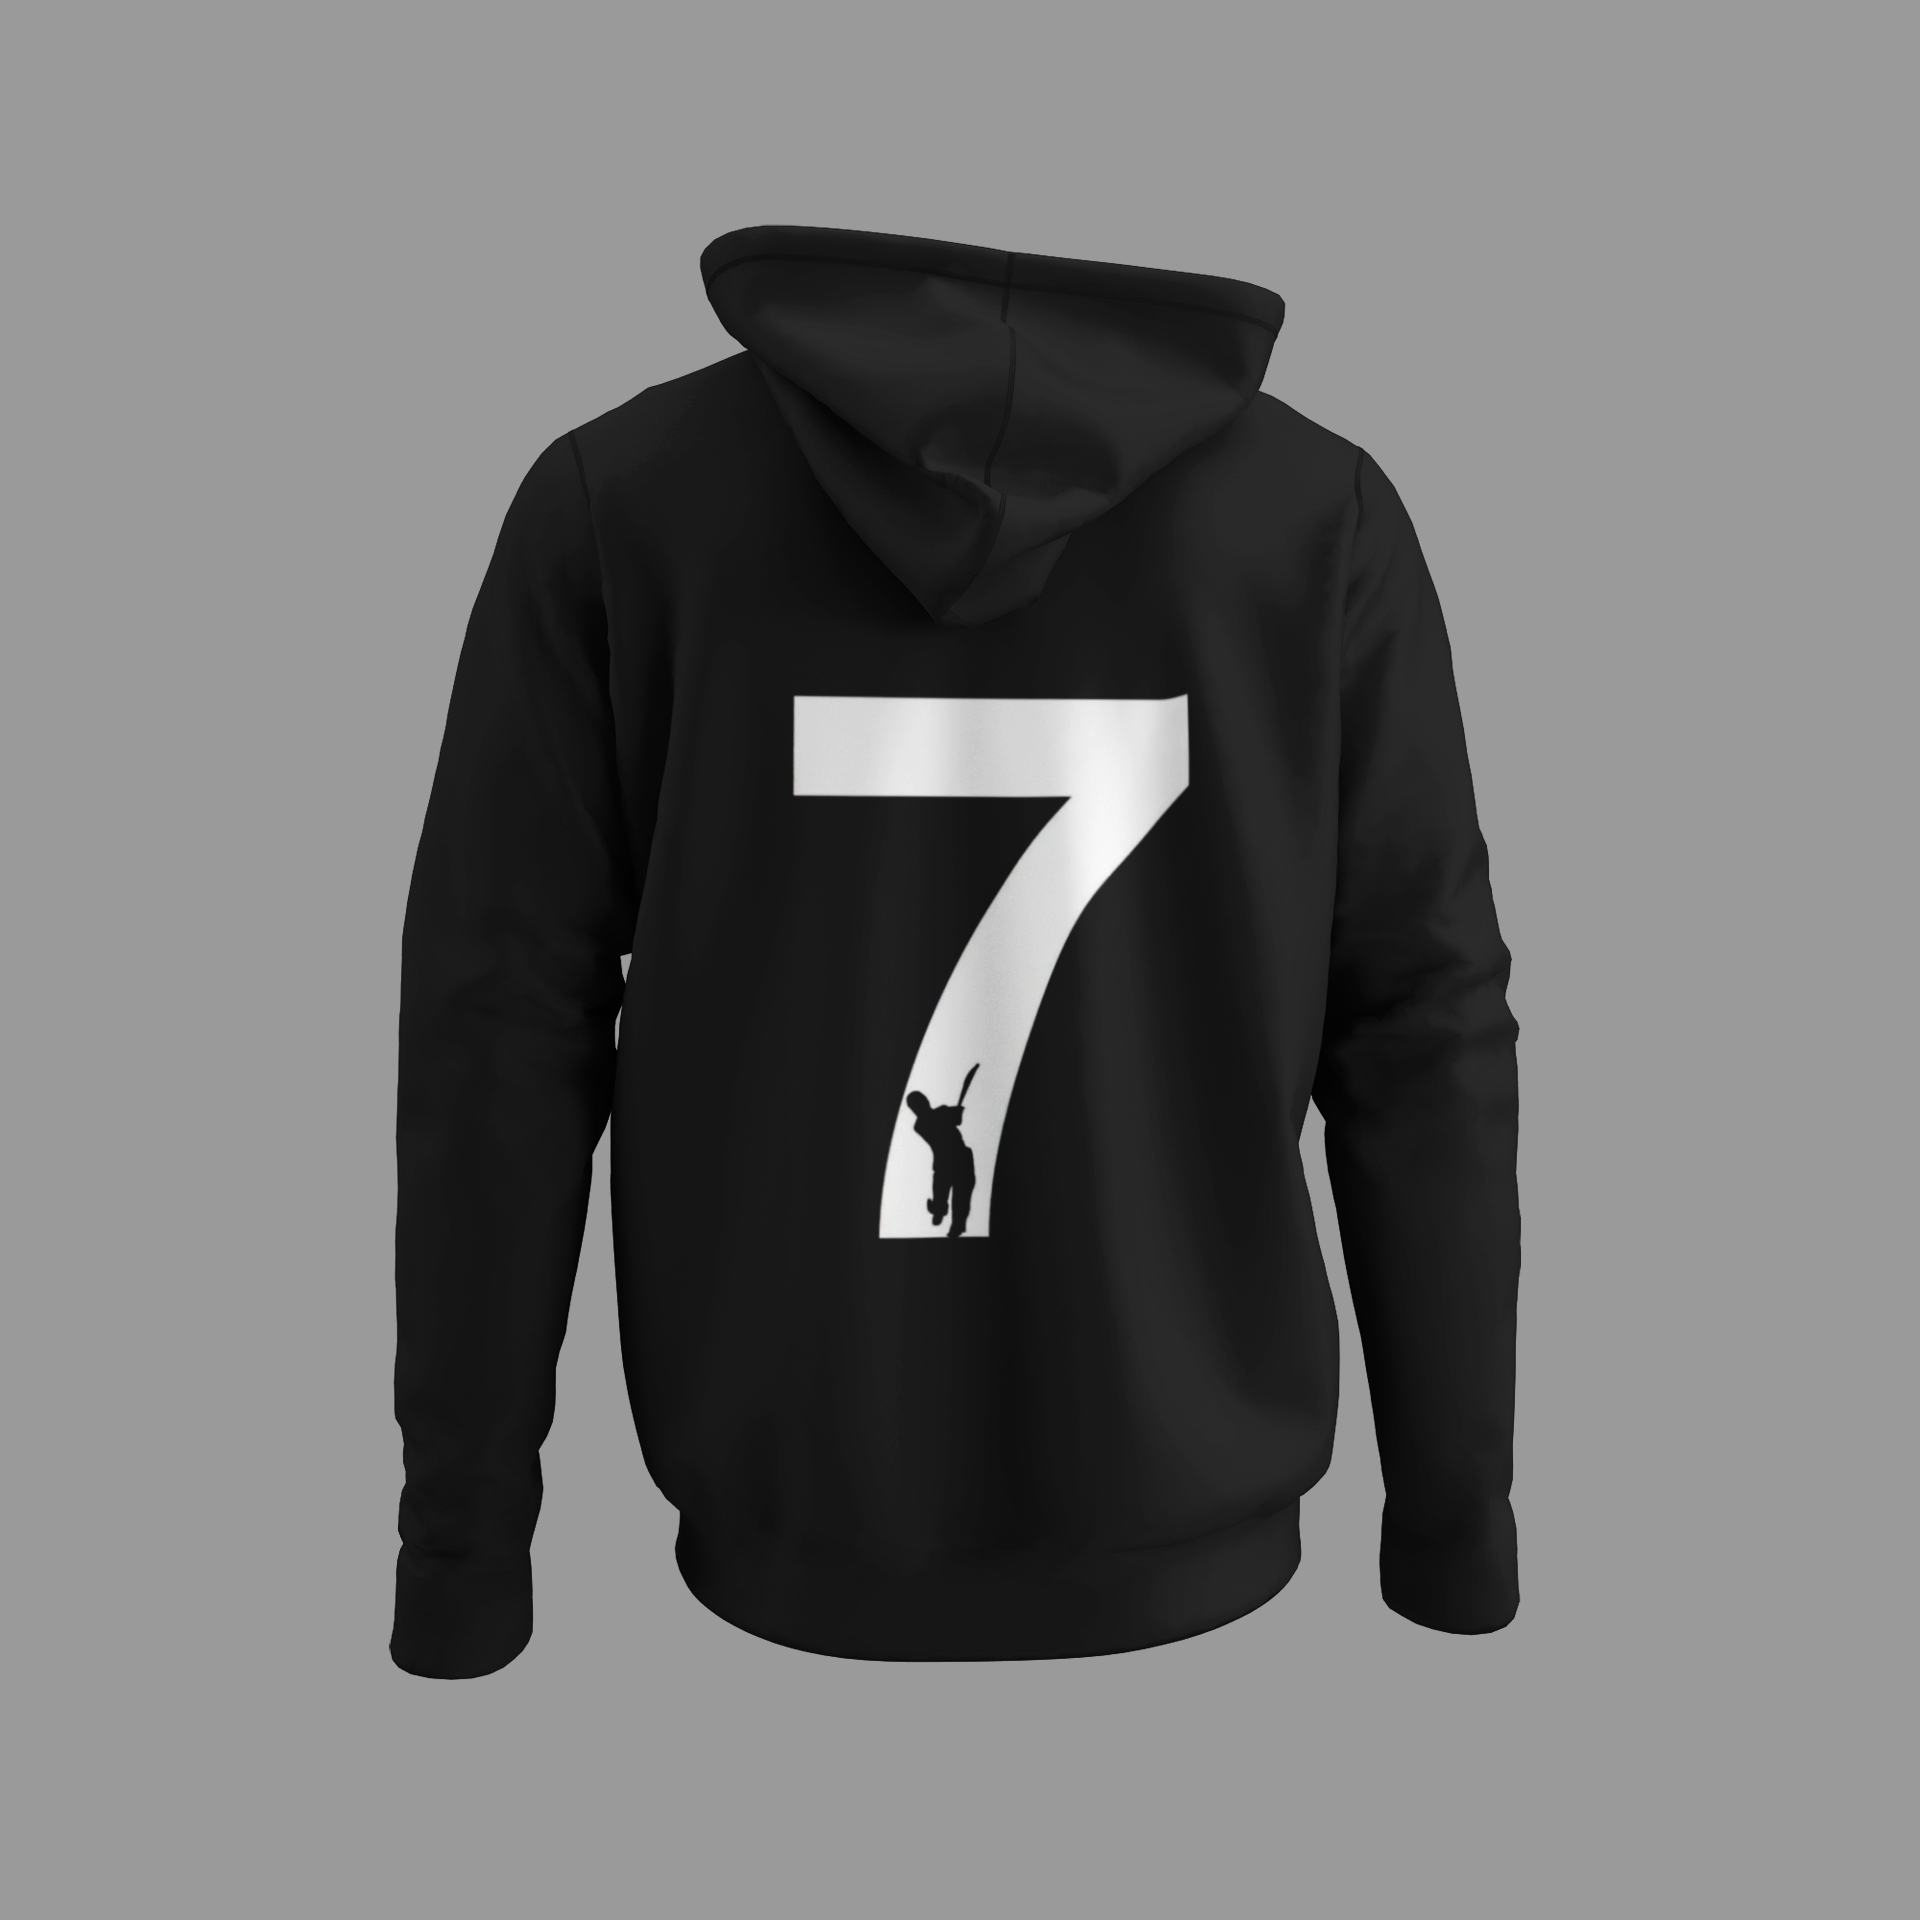 MS Dhoni 7 (Double Sided Print): WINTER HOODIES